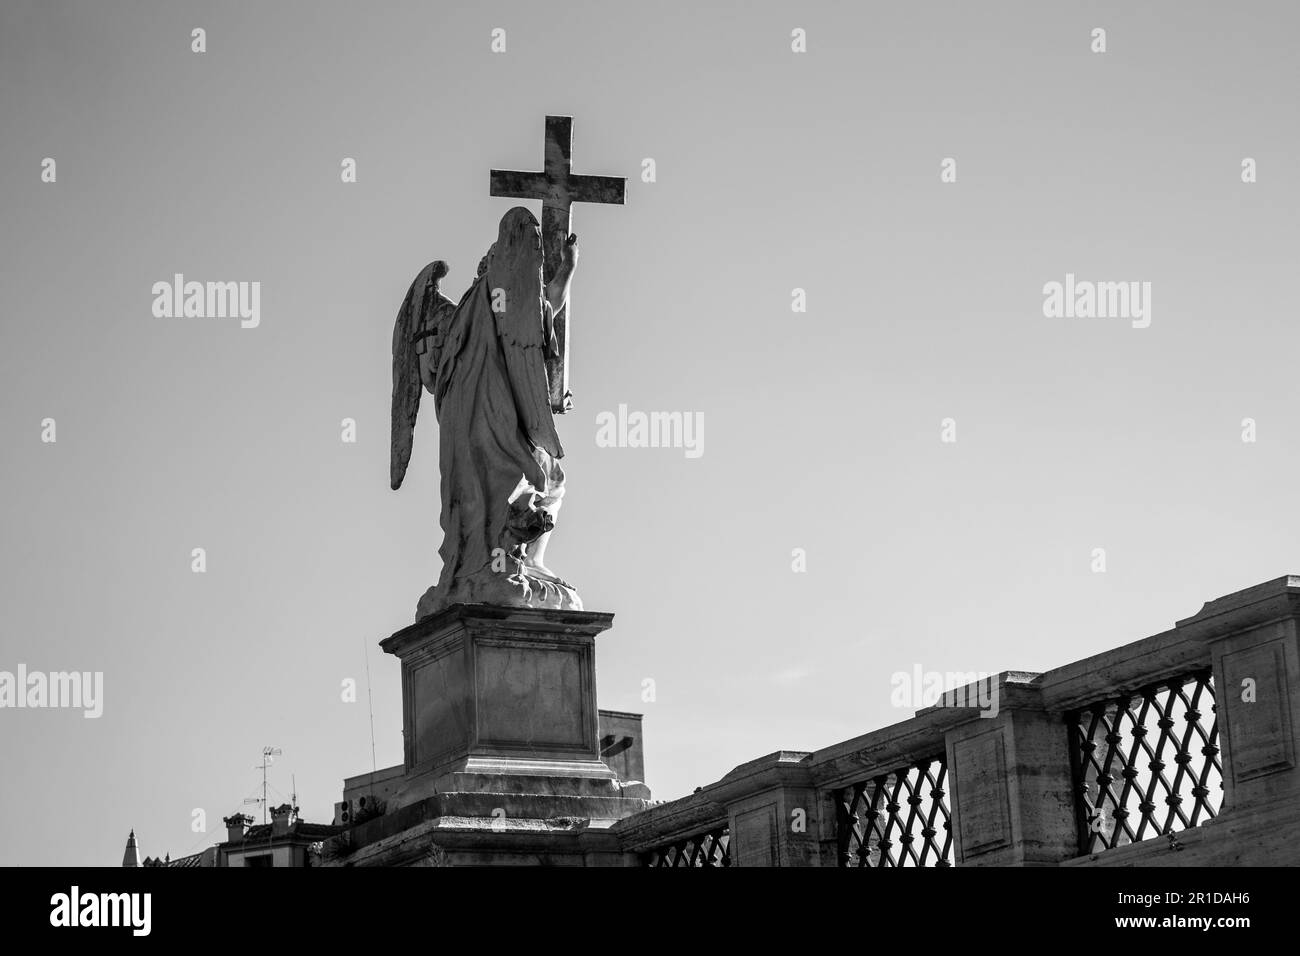 Black and white view of the statues an angel on a bridge with a cross on top. Rome, Italy Stock Photo